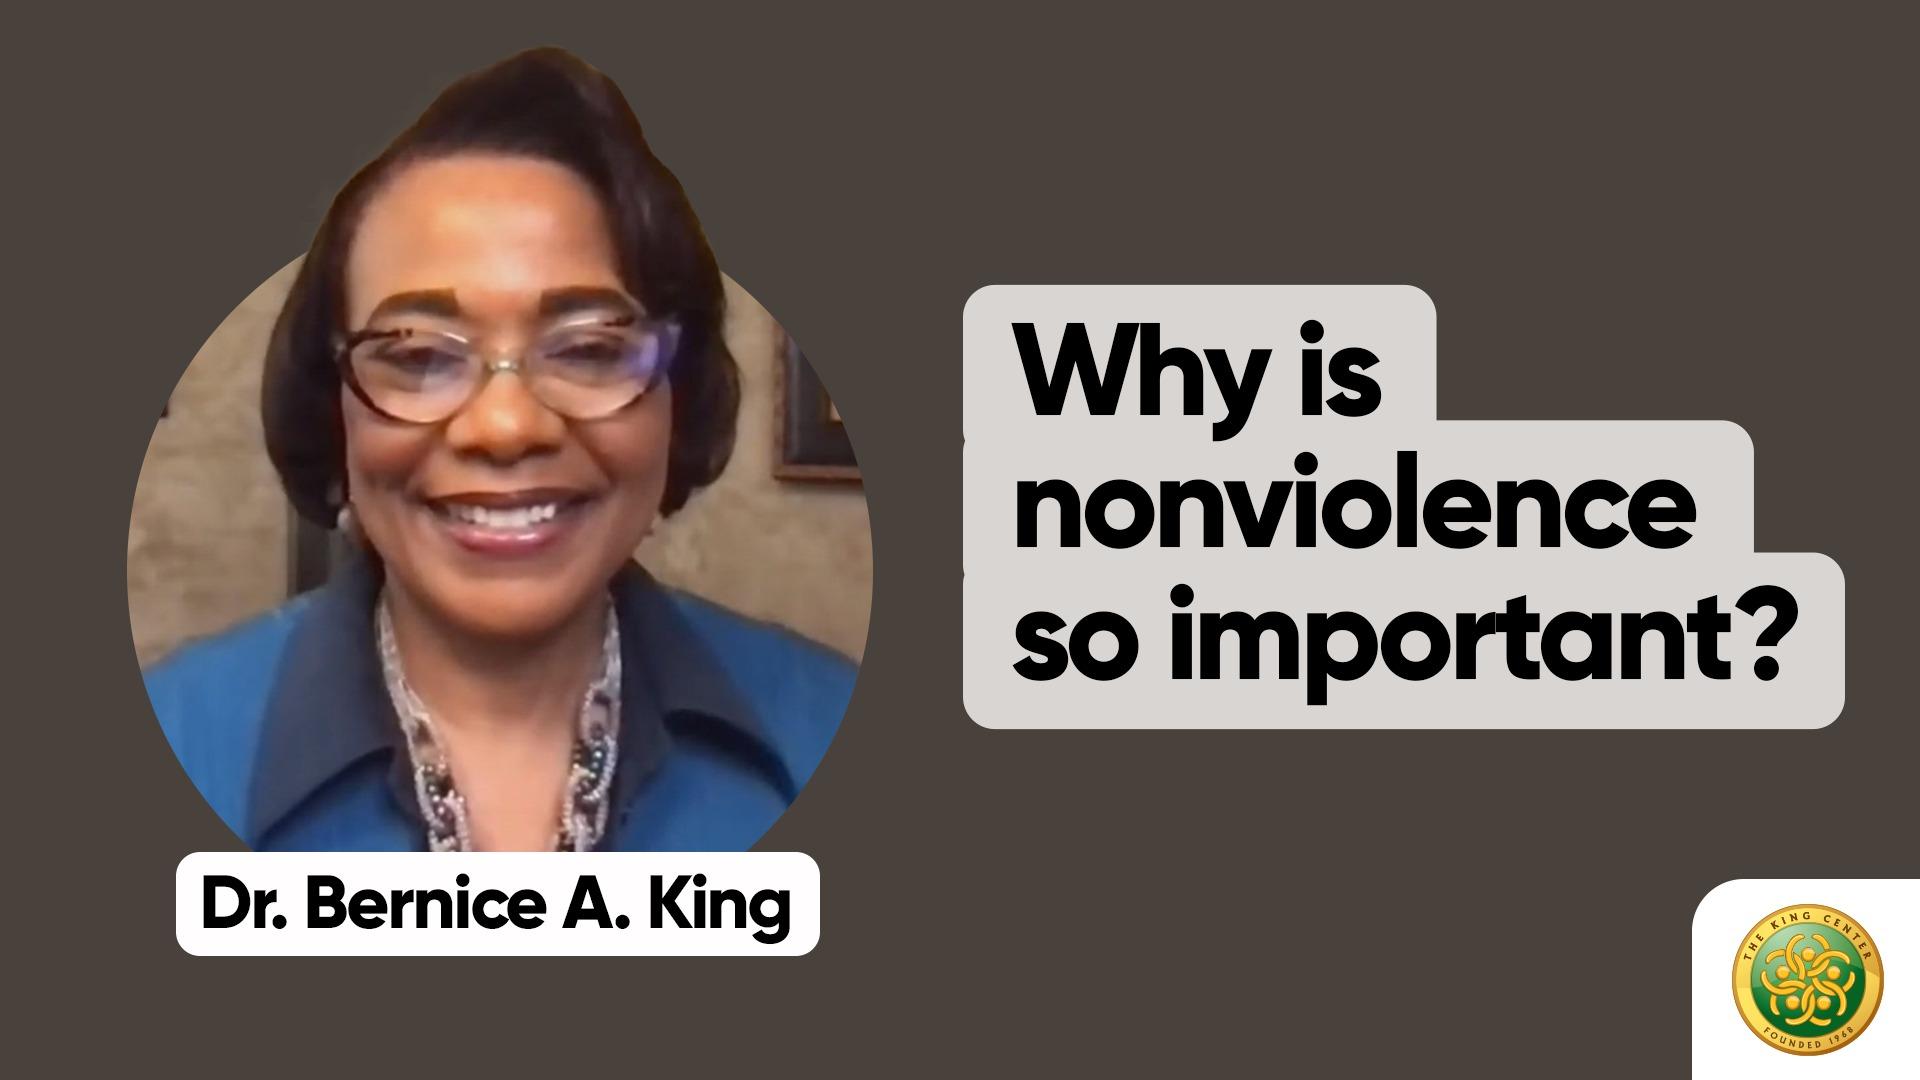 Dr. Bernice A King: Why is nonviolence so important 